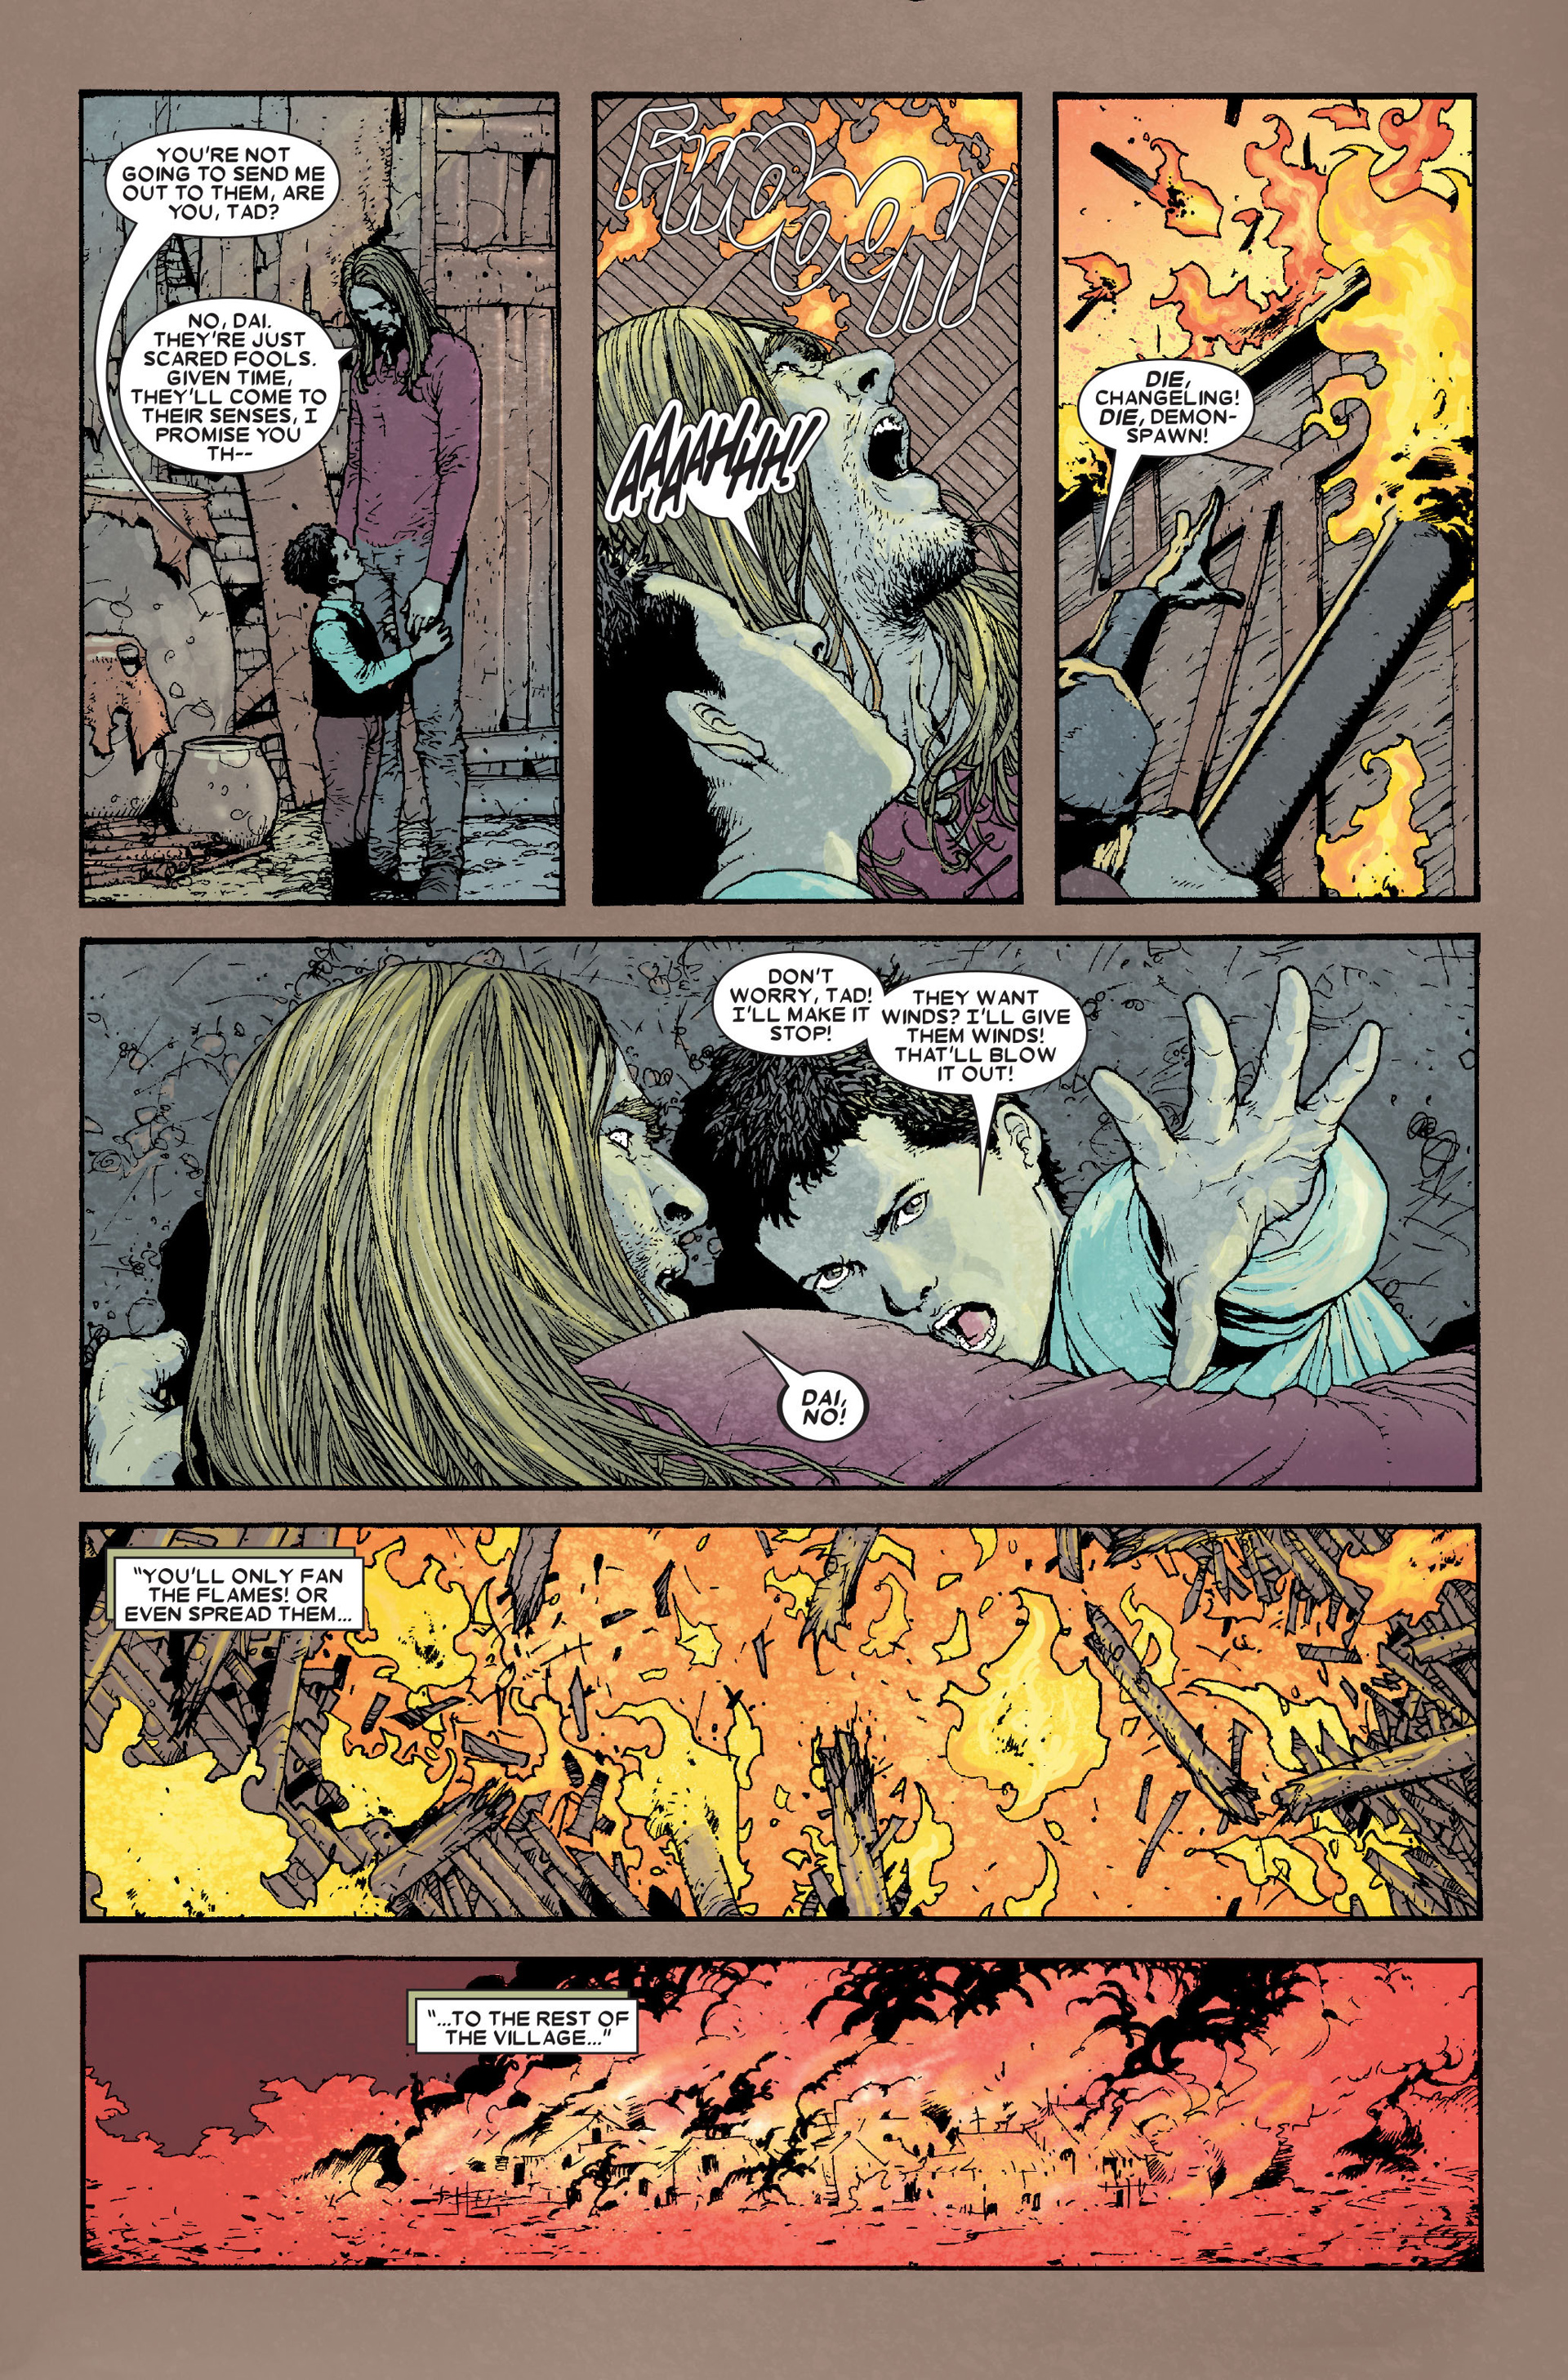 X-Factor (2006) 10 Page 4